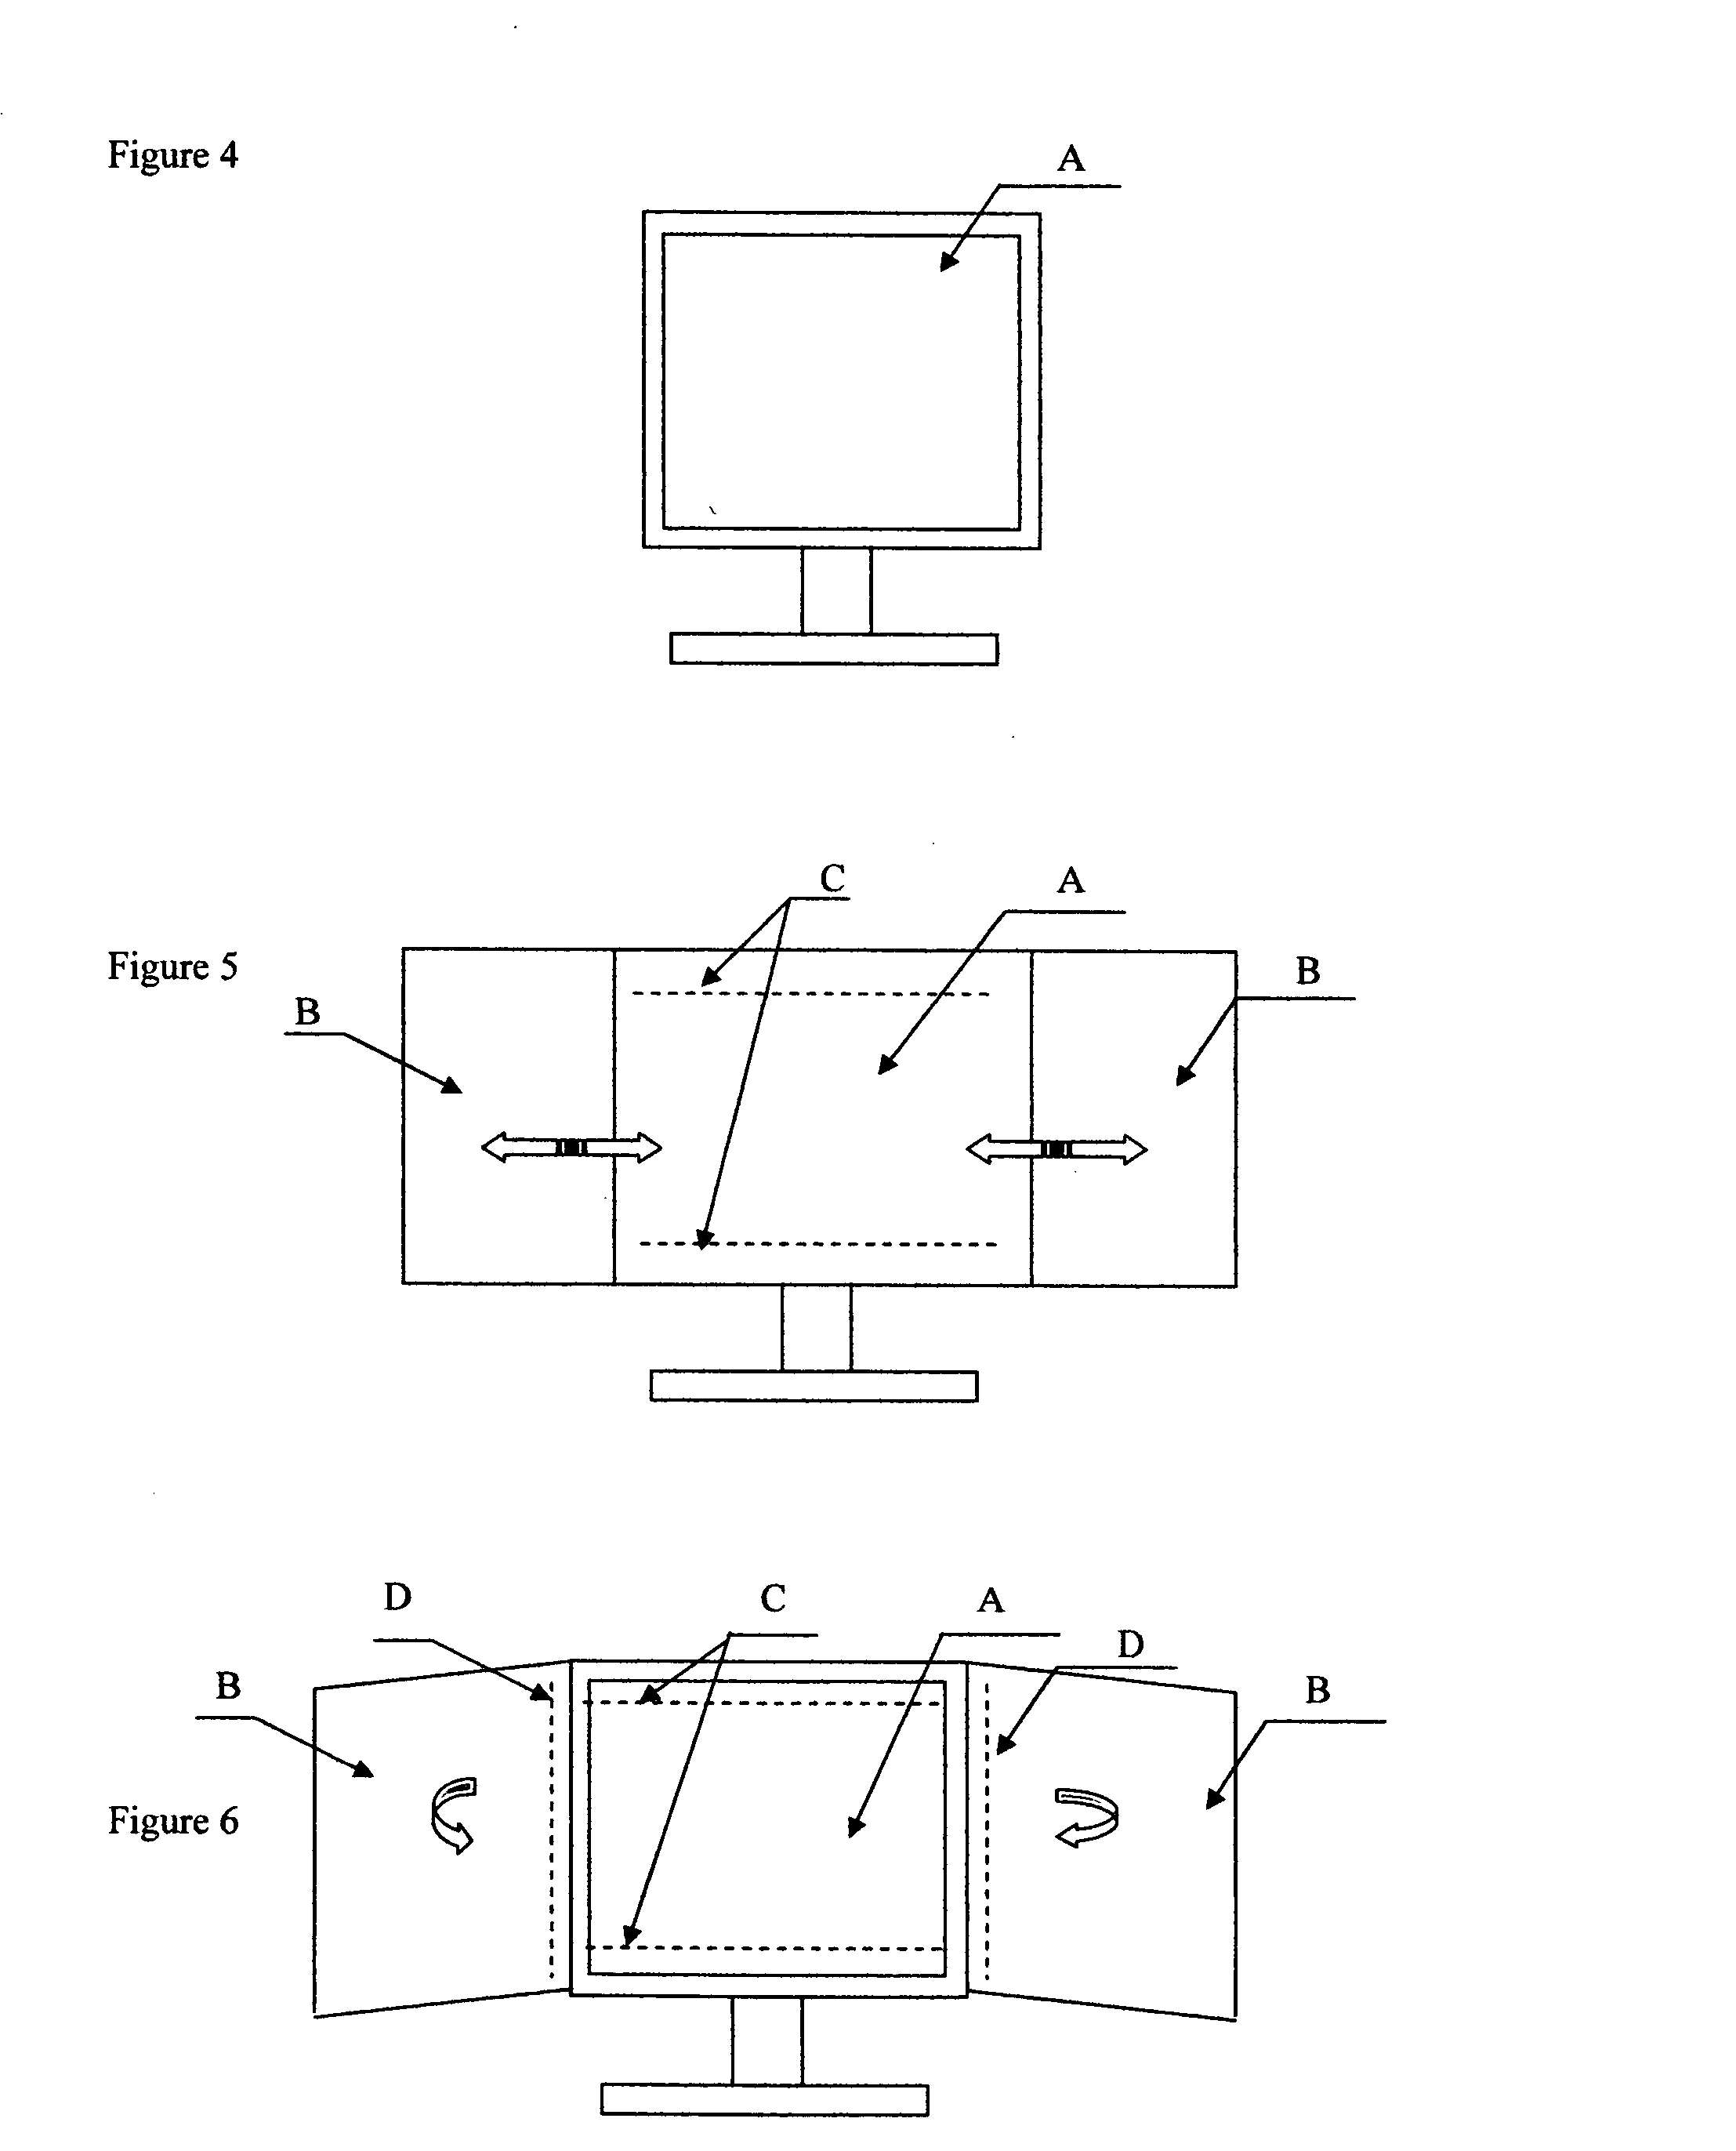 Extendable multi-screen flat panel (computer / television) monitor enabling increased workspace and viewable monitor surface